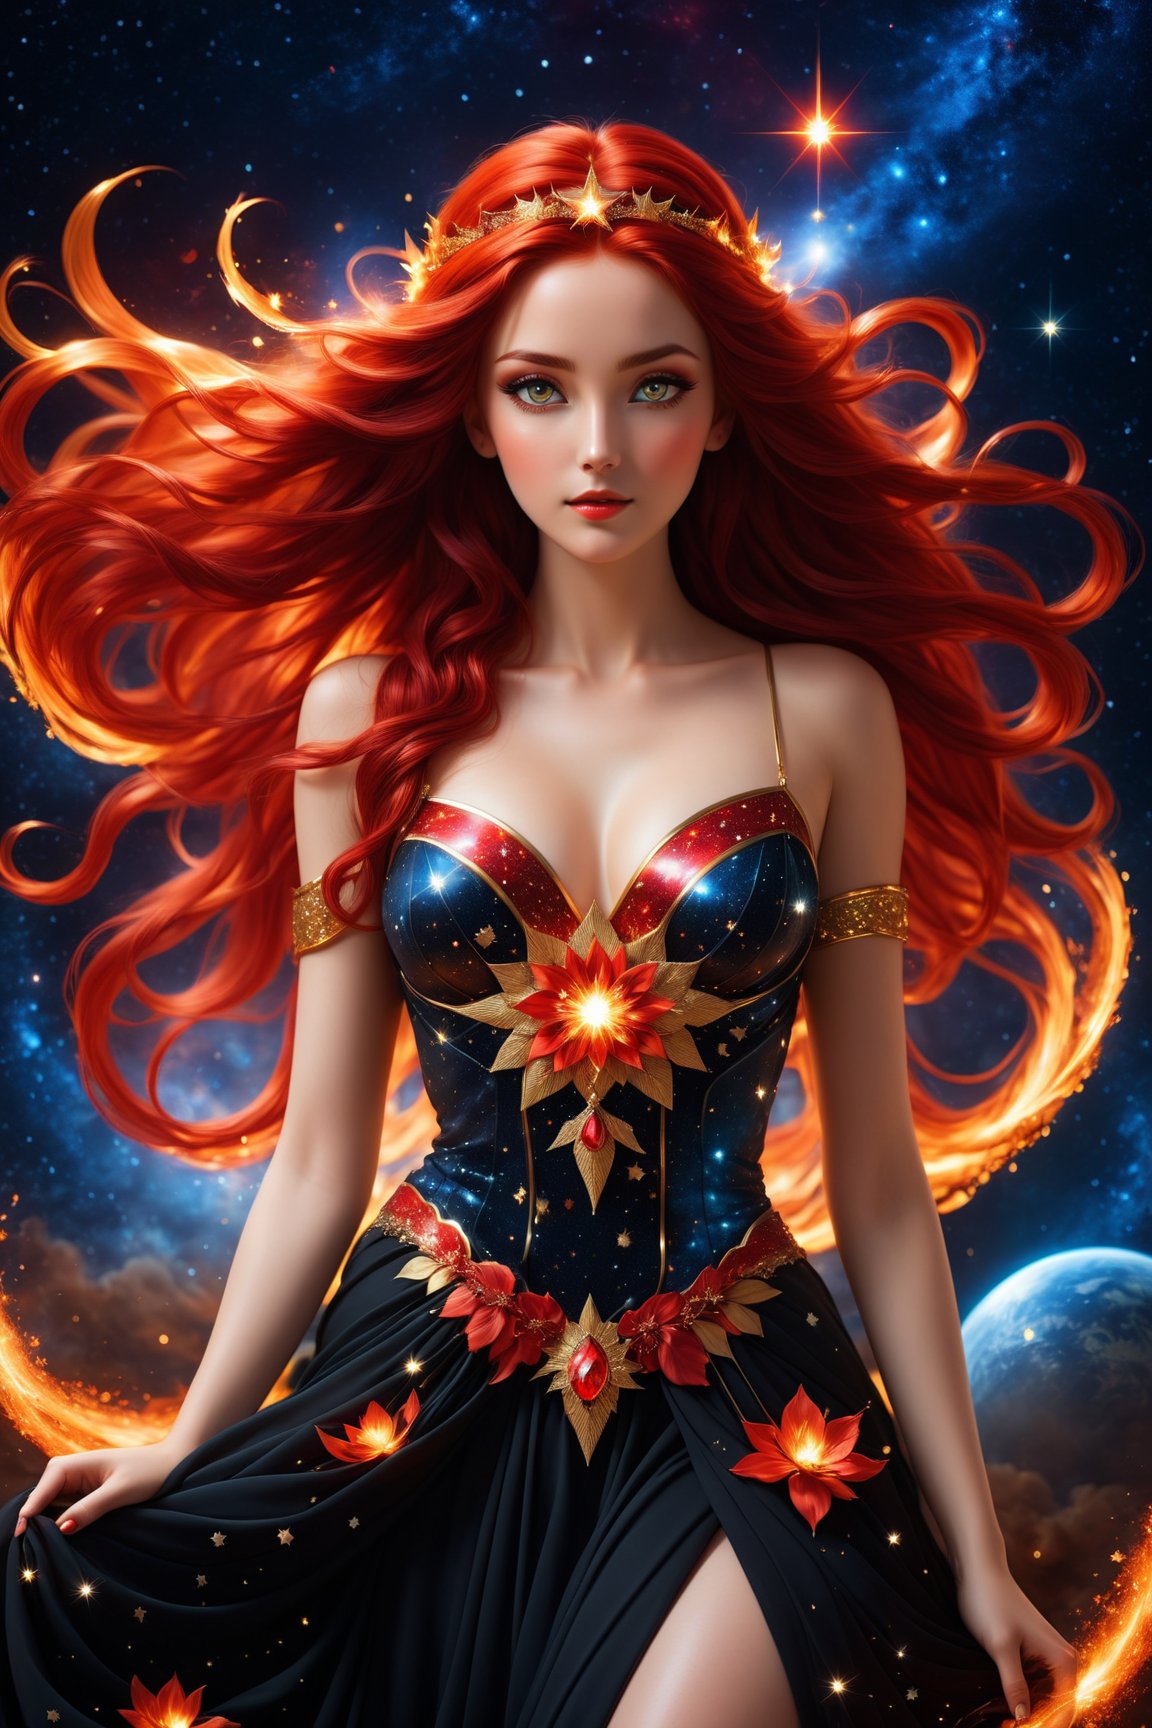 In the center of the picture stands a beautiful goddess of fire, a striking figure of unearthly beauty, she has flowing black and red hair, Her eyes, deep as the universe itself, radiate gentle wisdom and connection with all living things, The beautiful goddess is dressed in a heavenly star-spangled dress, as if she is part of the cosmos itself, The dress shimmers, luminism, smoothness, 3d render, by yukisakura, stunning full color,

